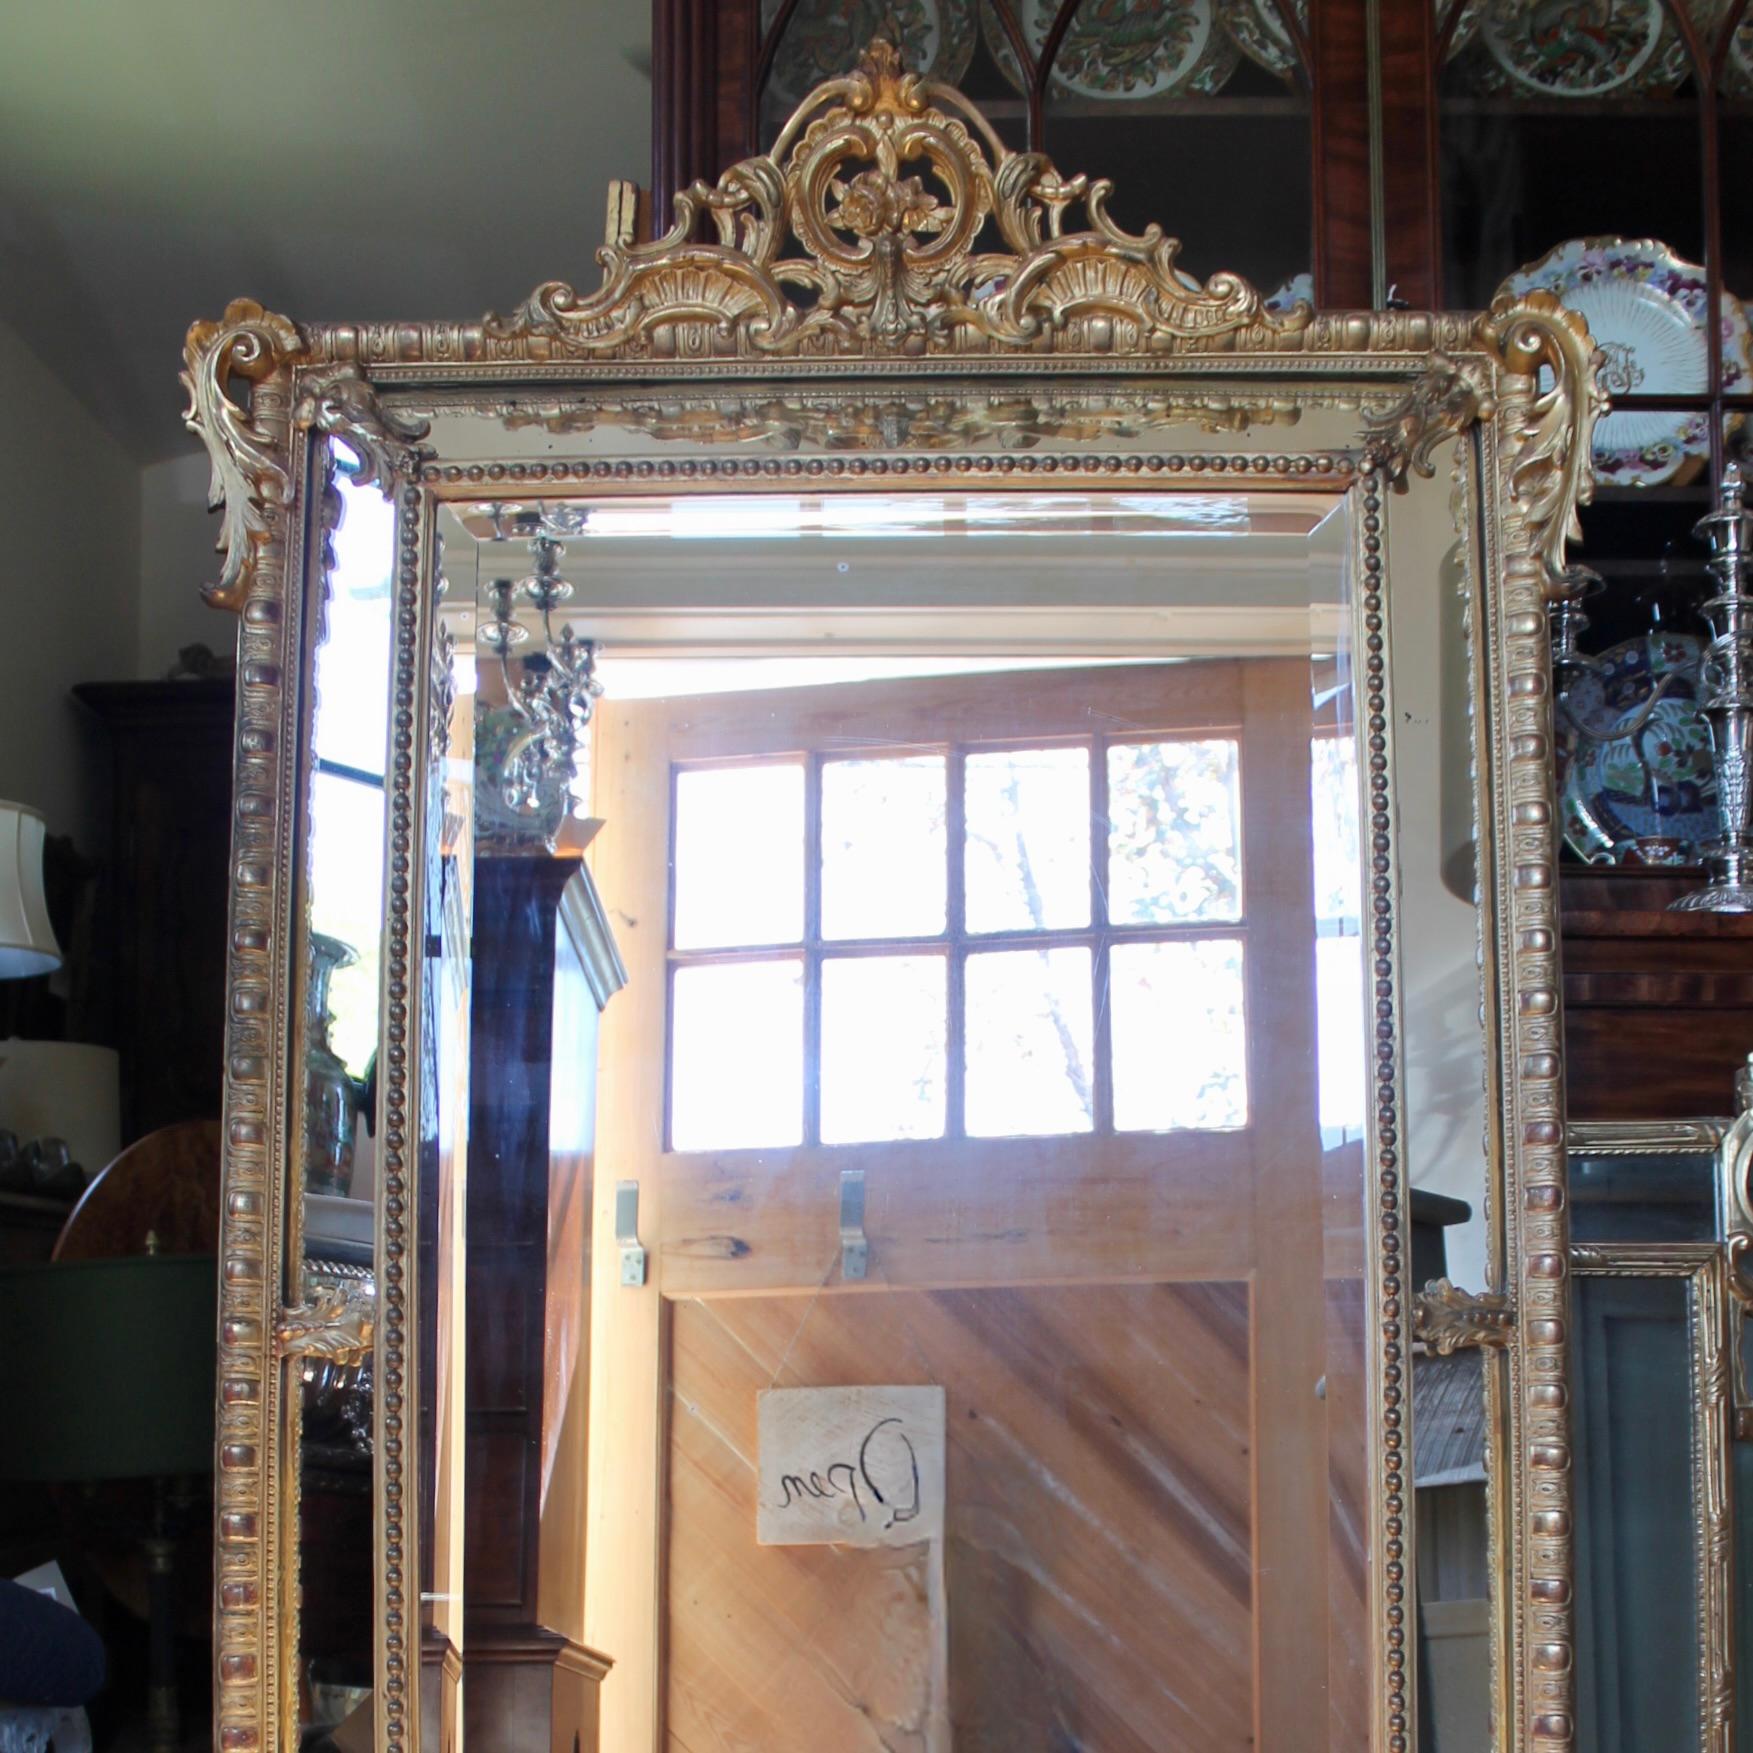 Louis XV Large French Gilt Borderglass Pier Mirror with Rococo Crest, 19th Century For Sale